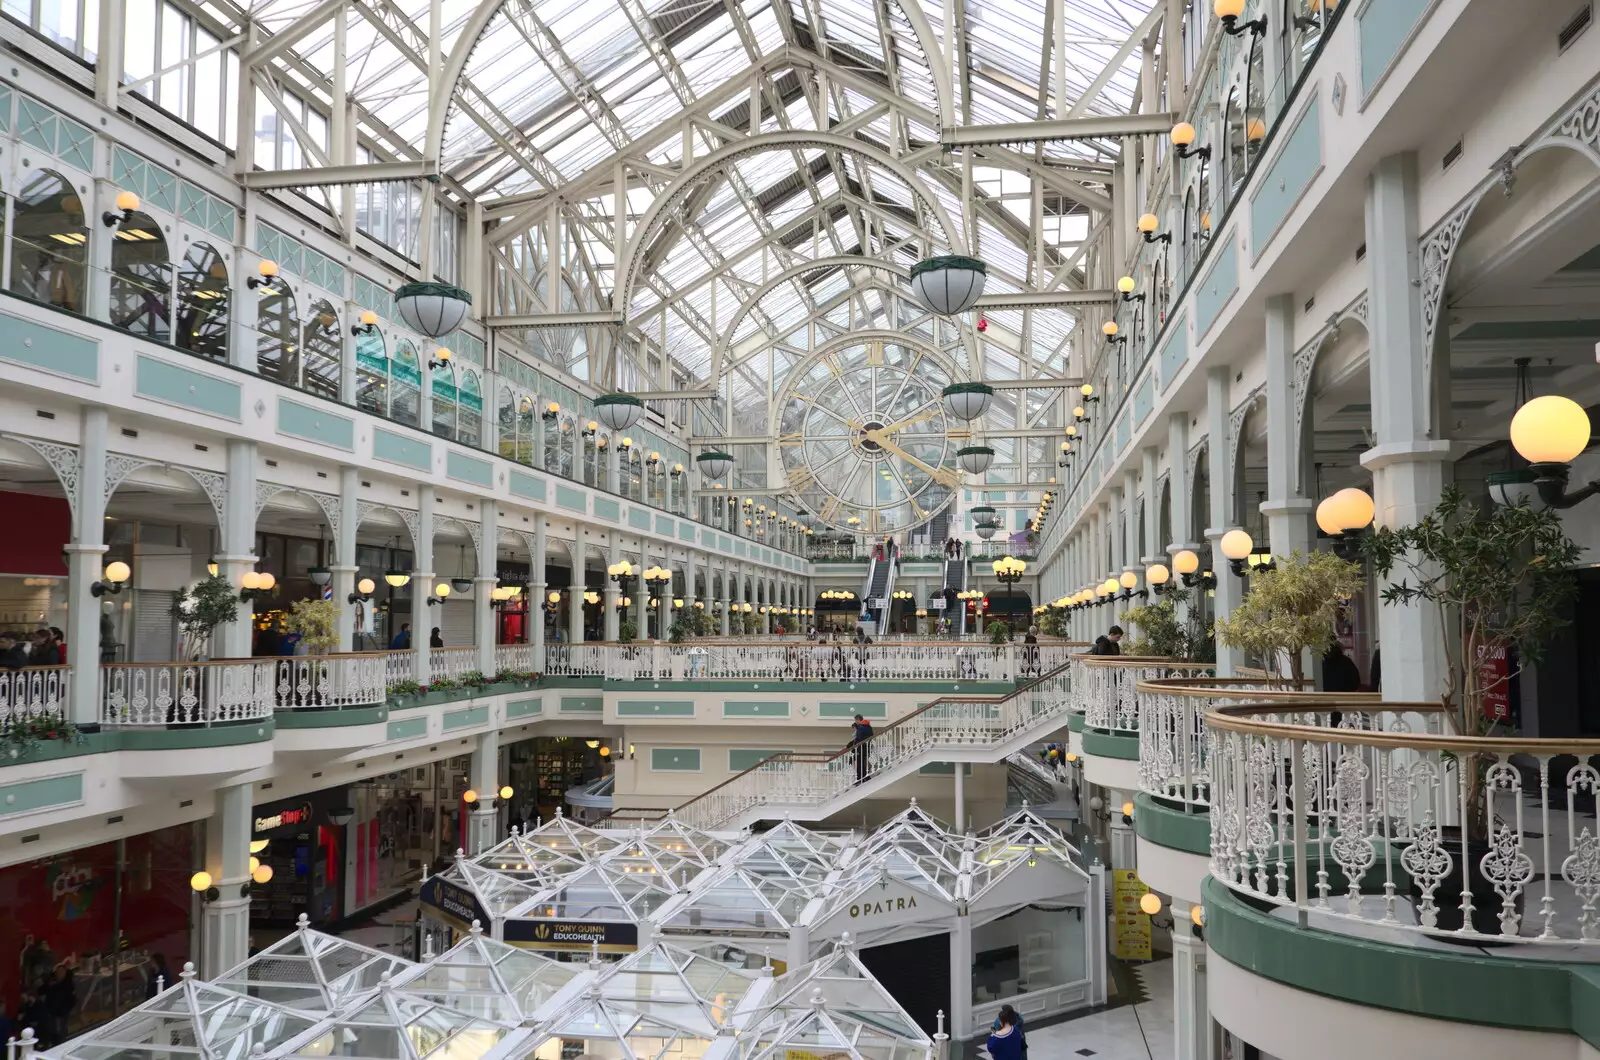 St. Stephen's shopping centre, from The Dead Zoo, Dublin, Ireland - 17th February 2023